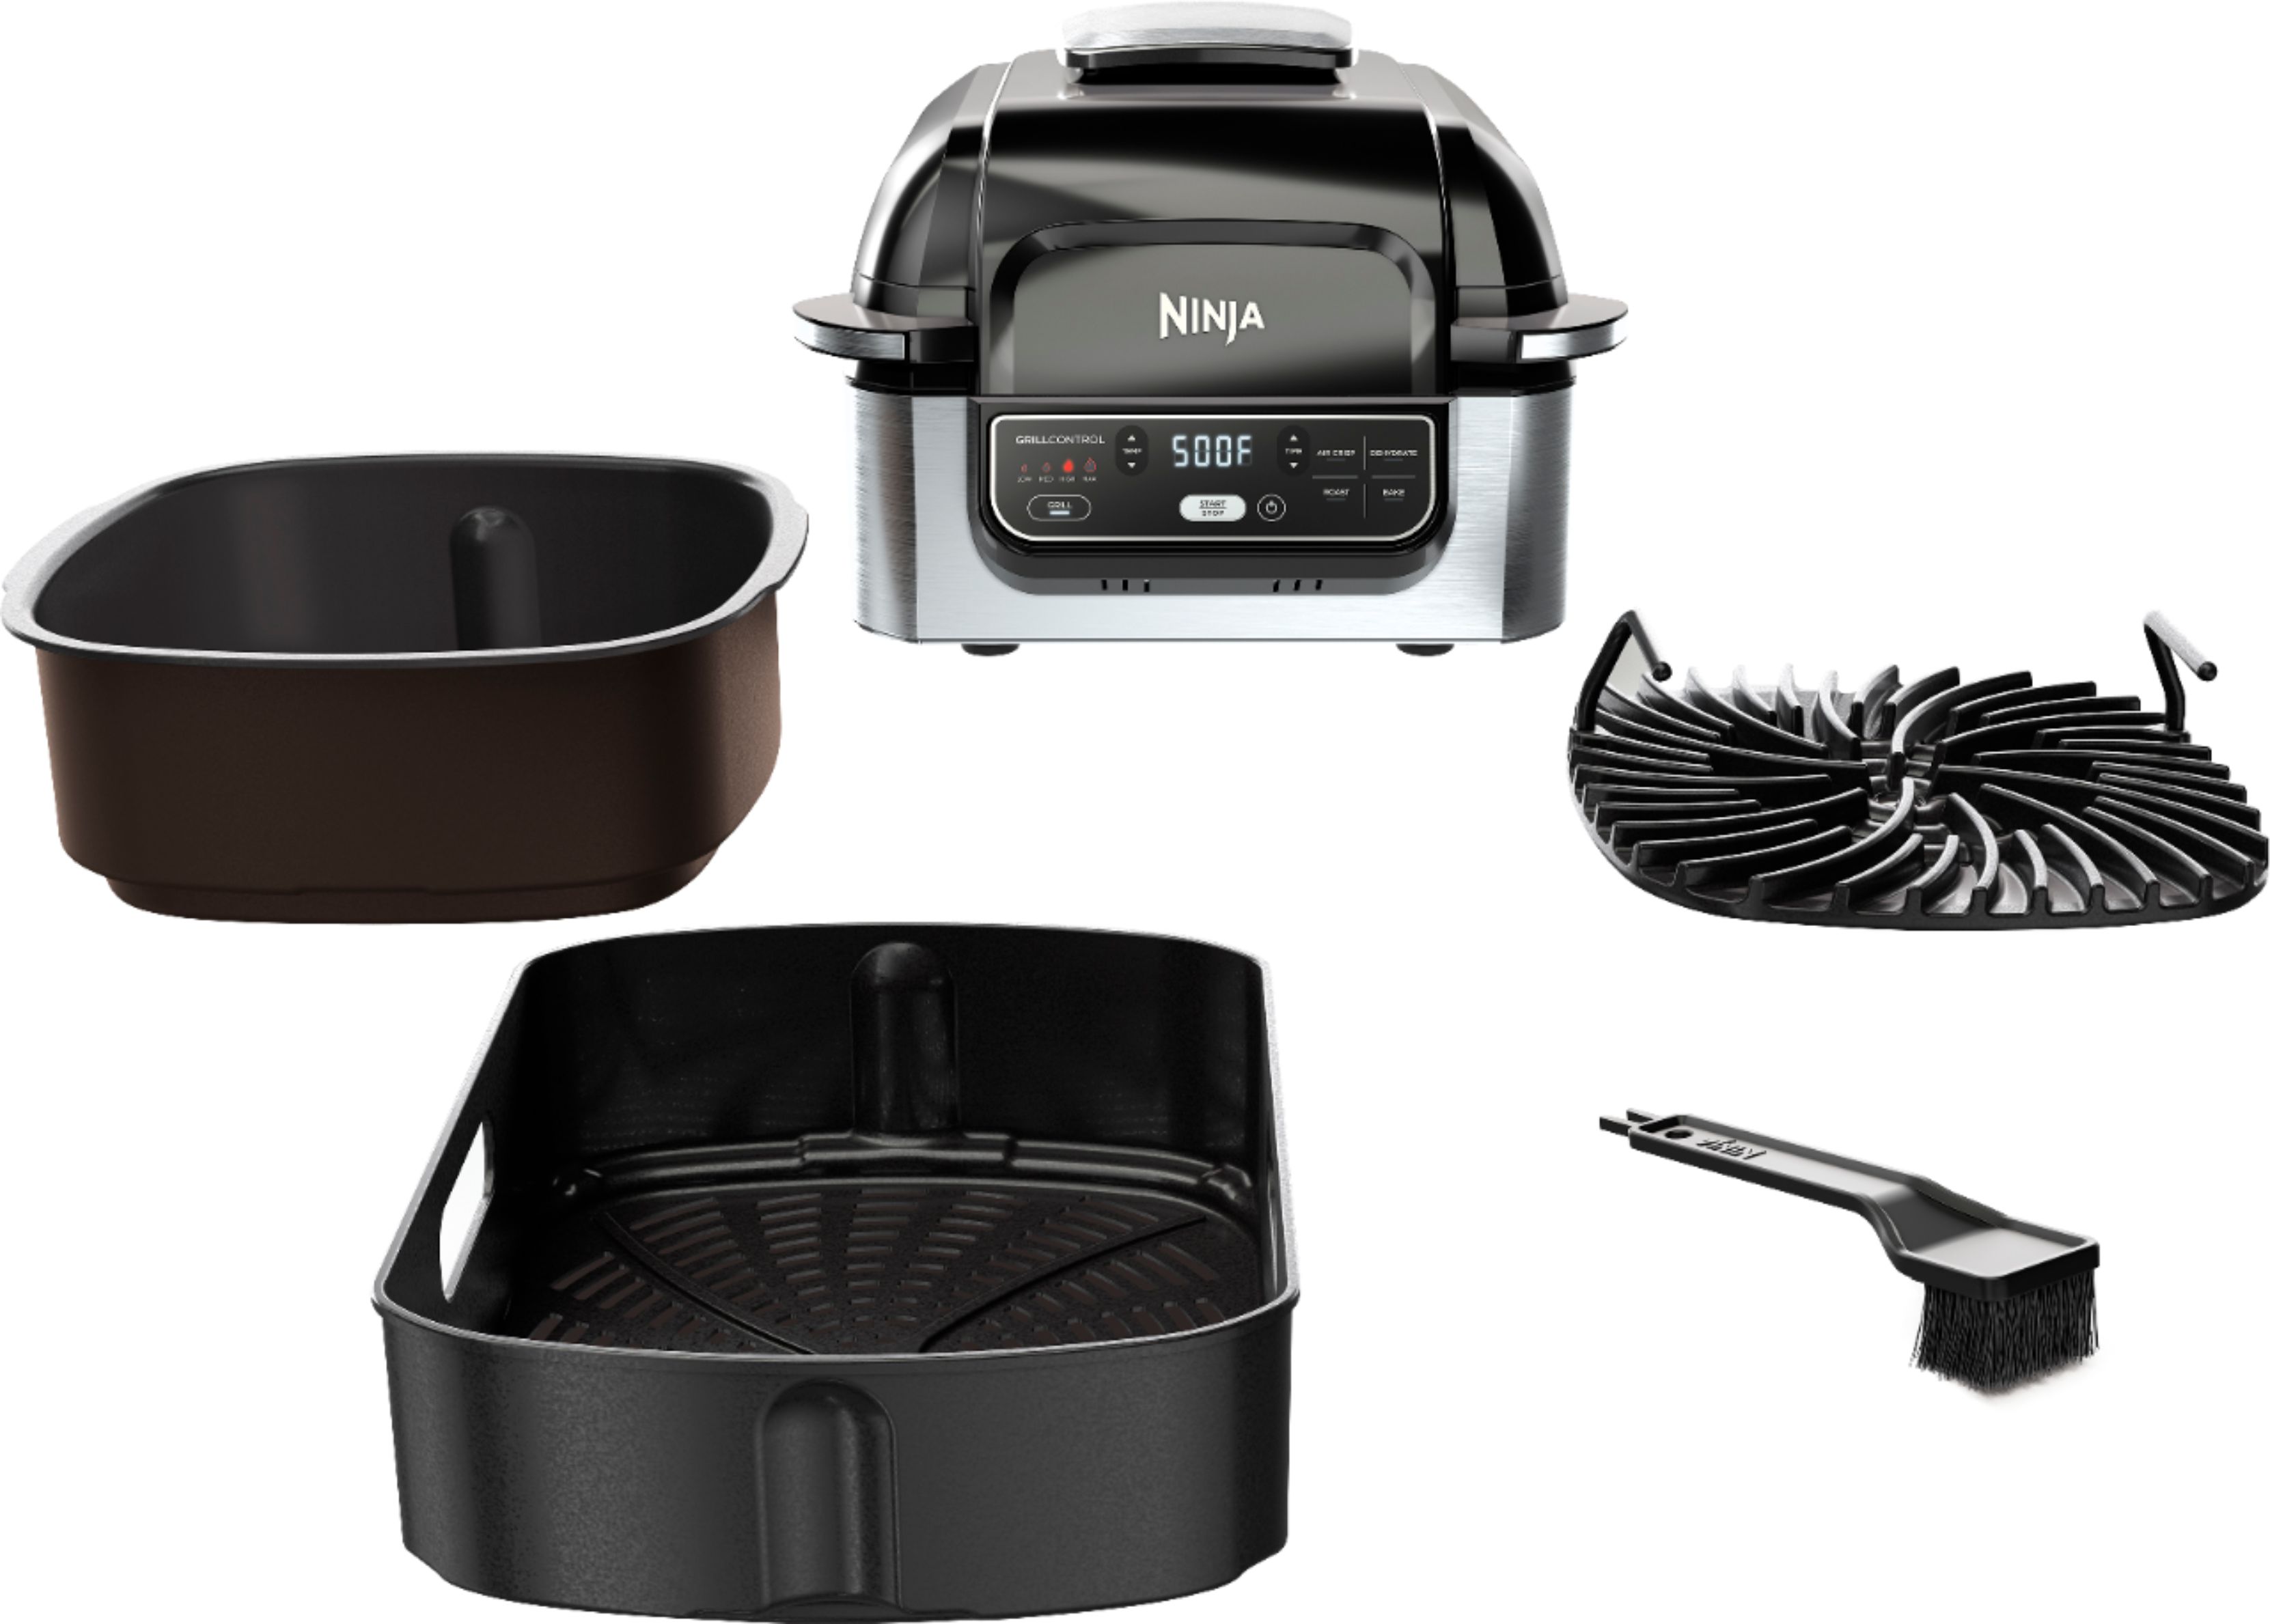 Ninja Foodi XL Pro 5-in-1 Indoor Grill & Griddle with 4-Quart Air Fryer,  and Bake, IG600 - Yahoo Shopping